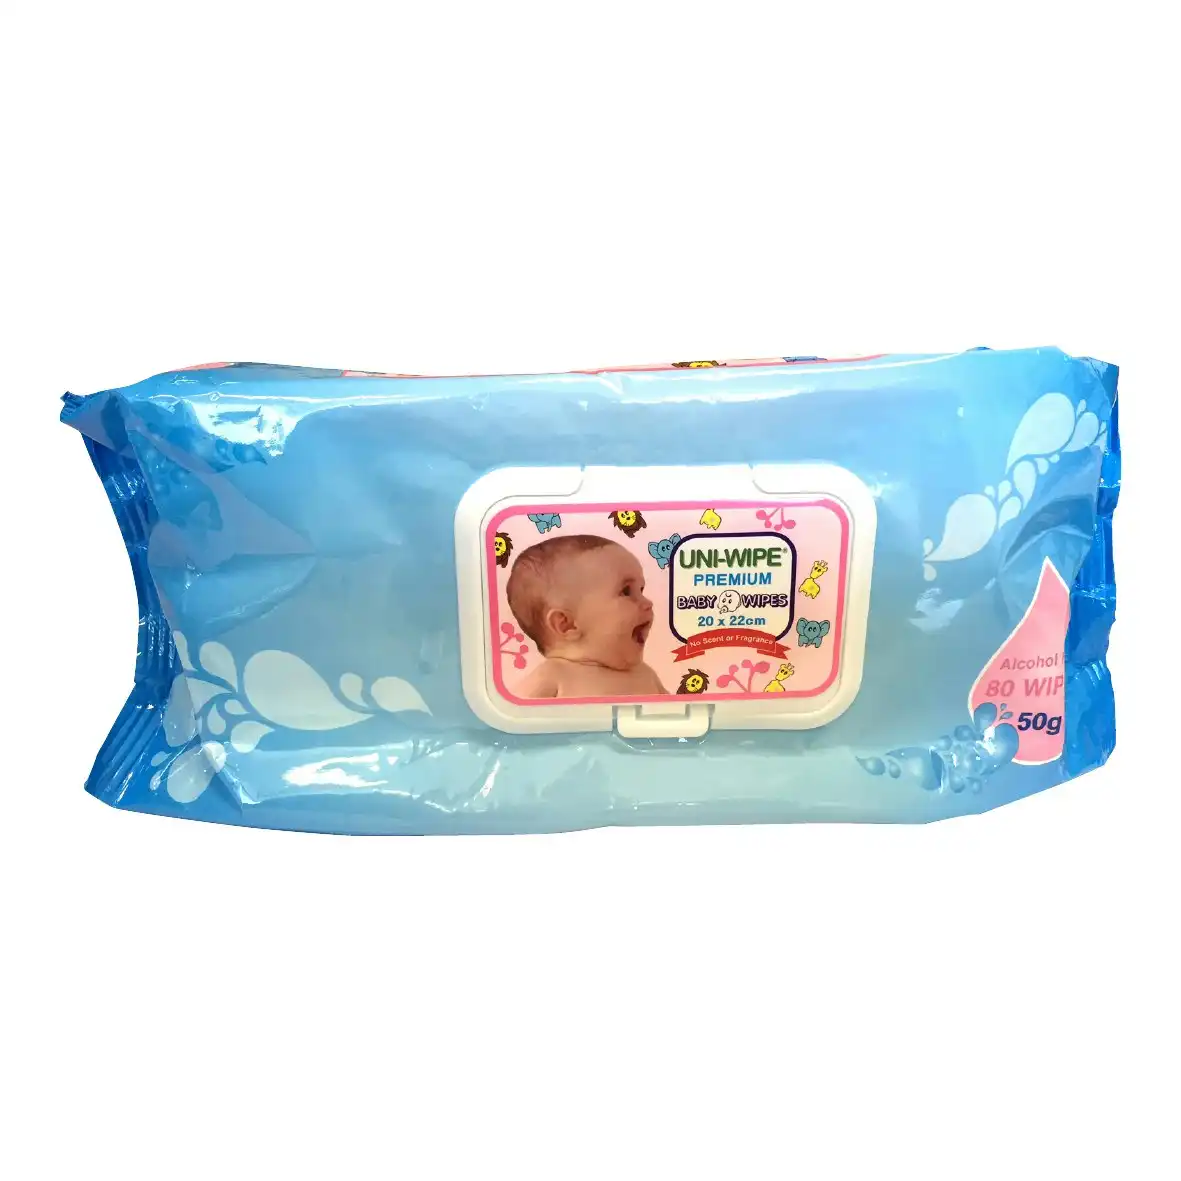 Uni-Wipe Baby Wipes Unscented, 22x20cm, 50 GSM Thick, Alcohol-Free, 80 Wipes in Soft Pack with Hard Secure Lid